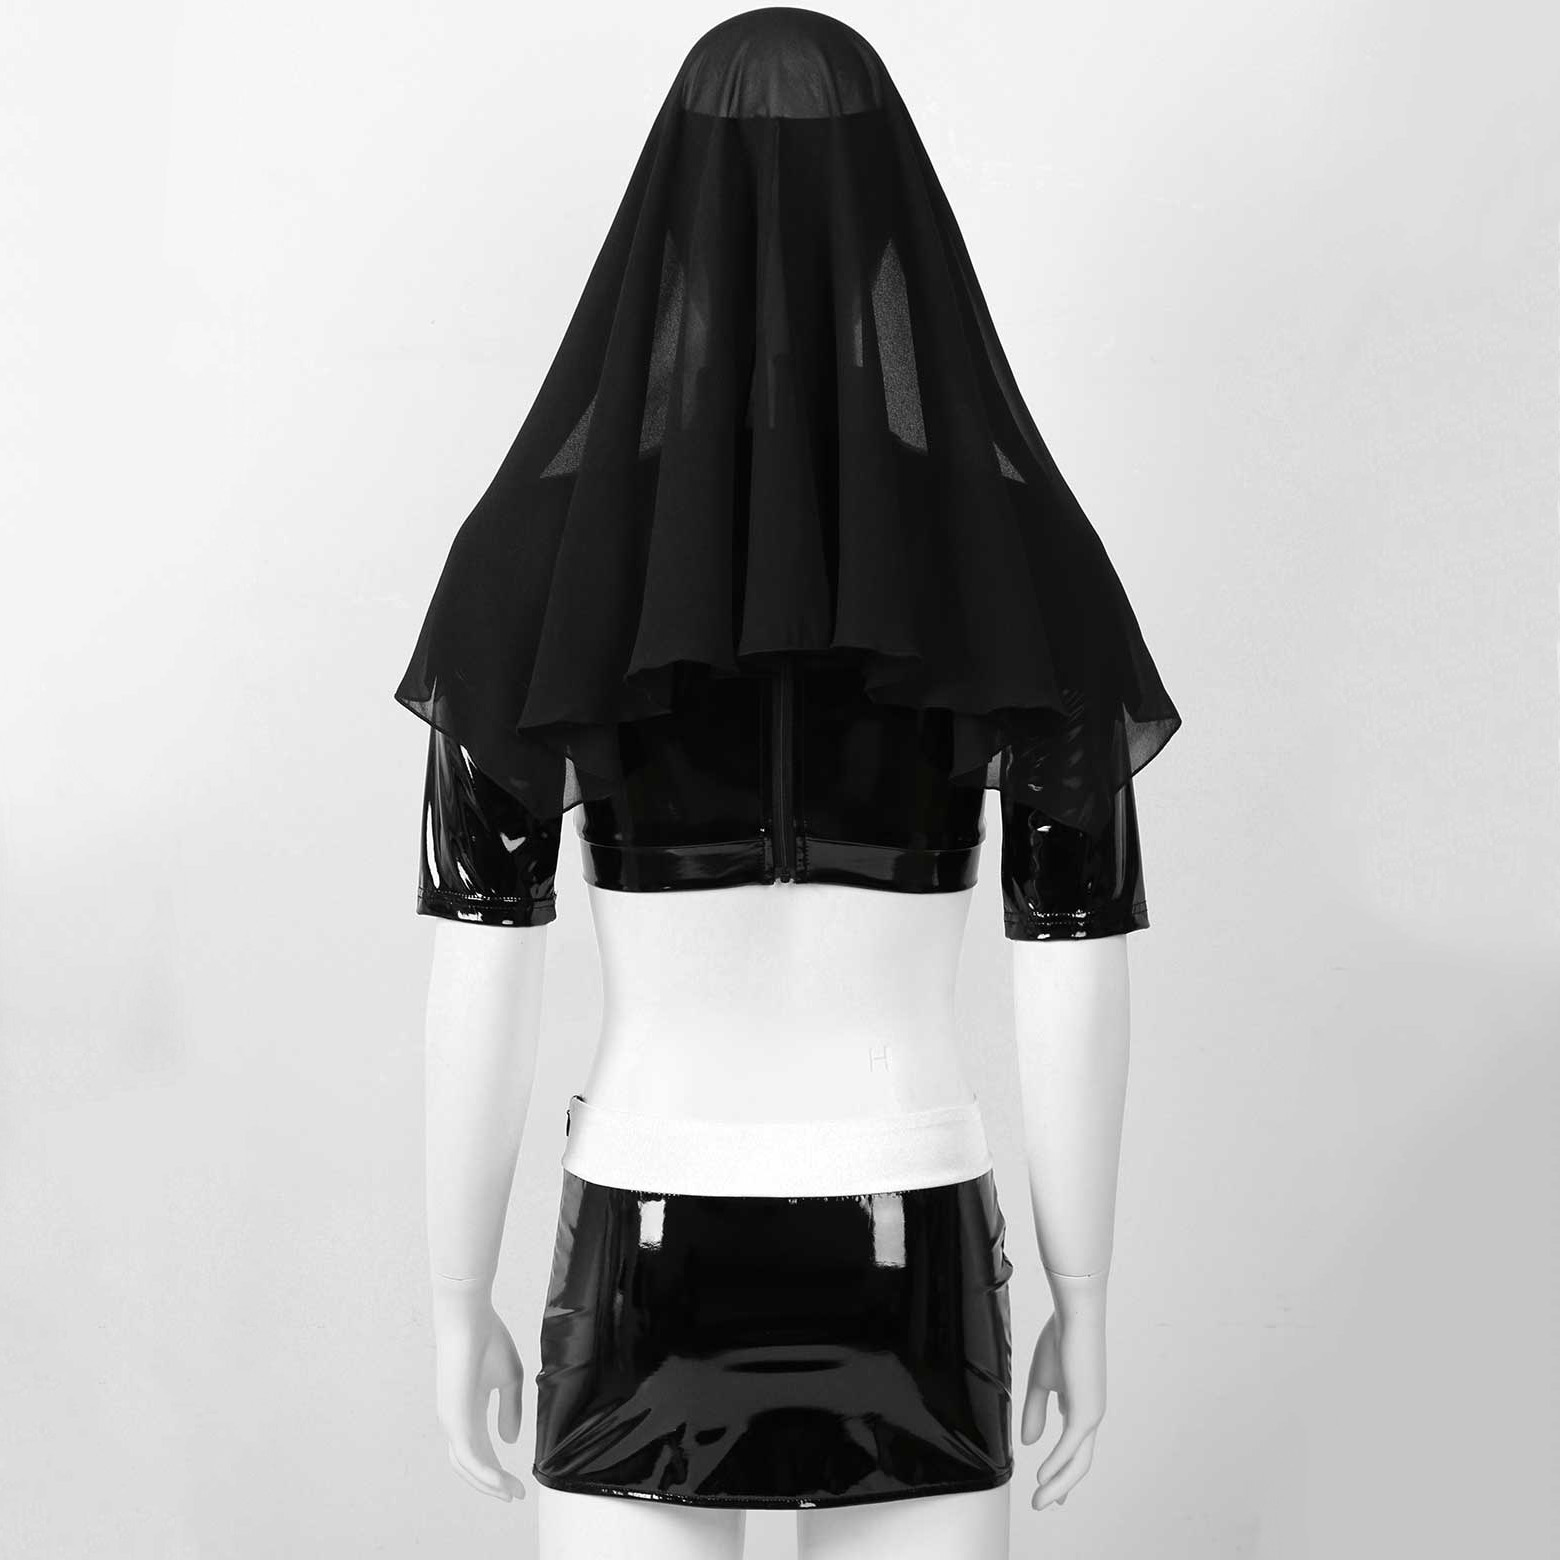 Women Sexy Cosplay Naughty Nun Costume / Crop Top with Mini Bodycon Skirt and Headpiece - EVE's SECRETS